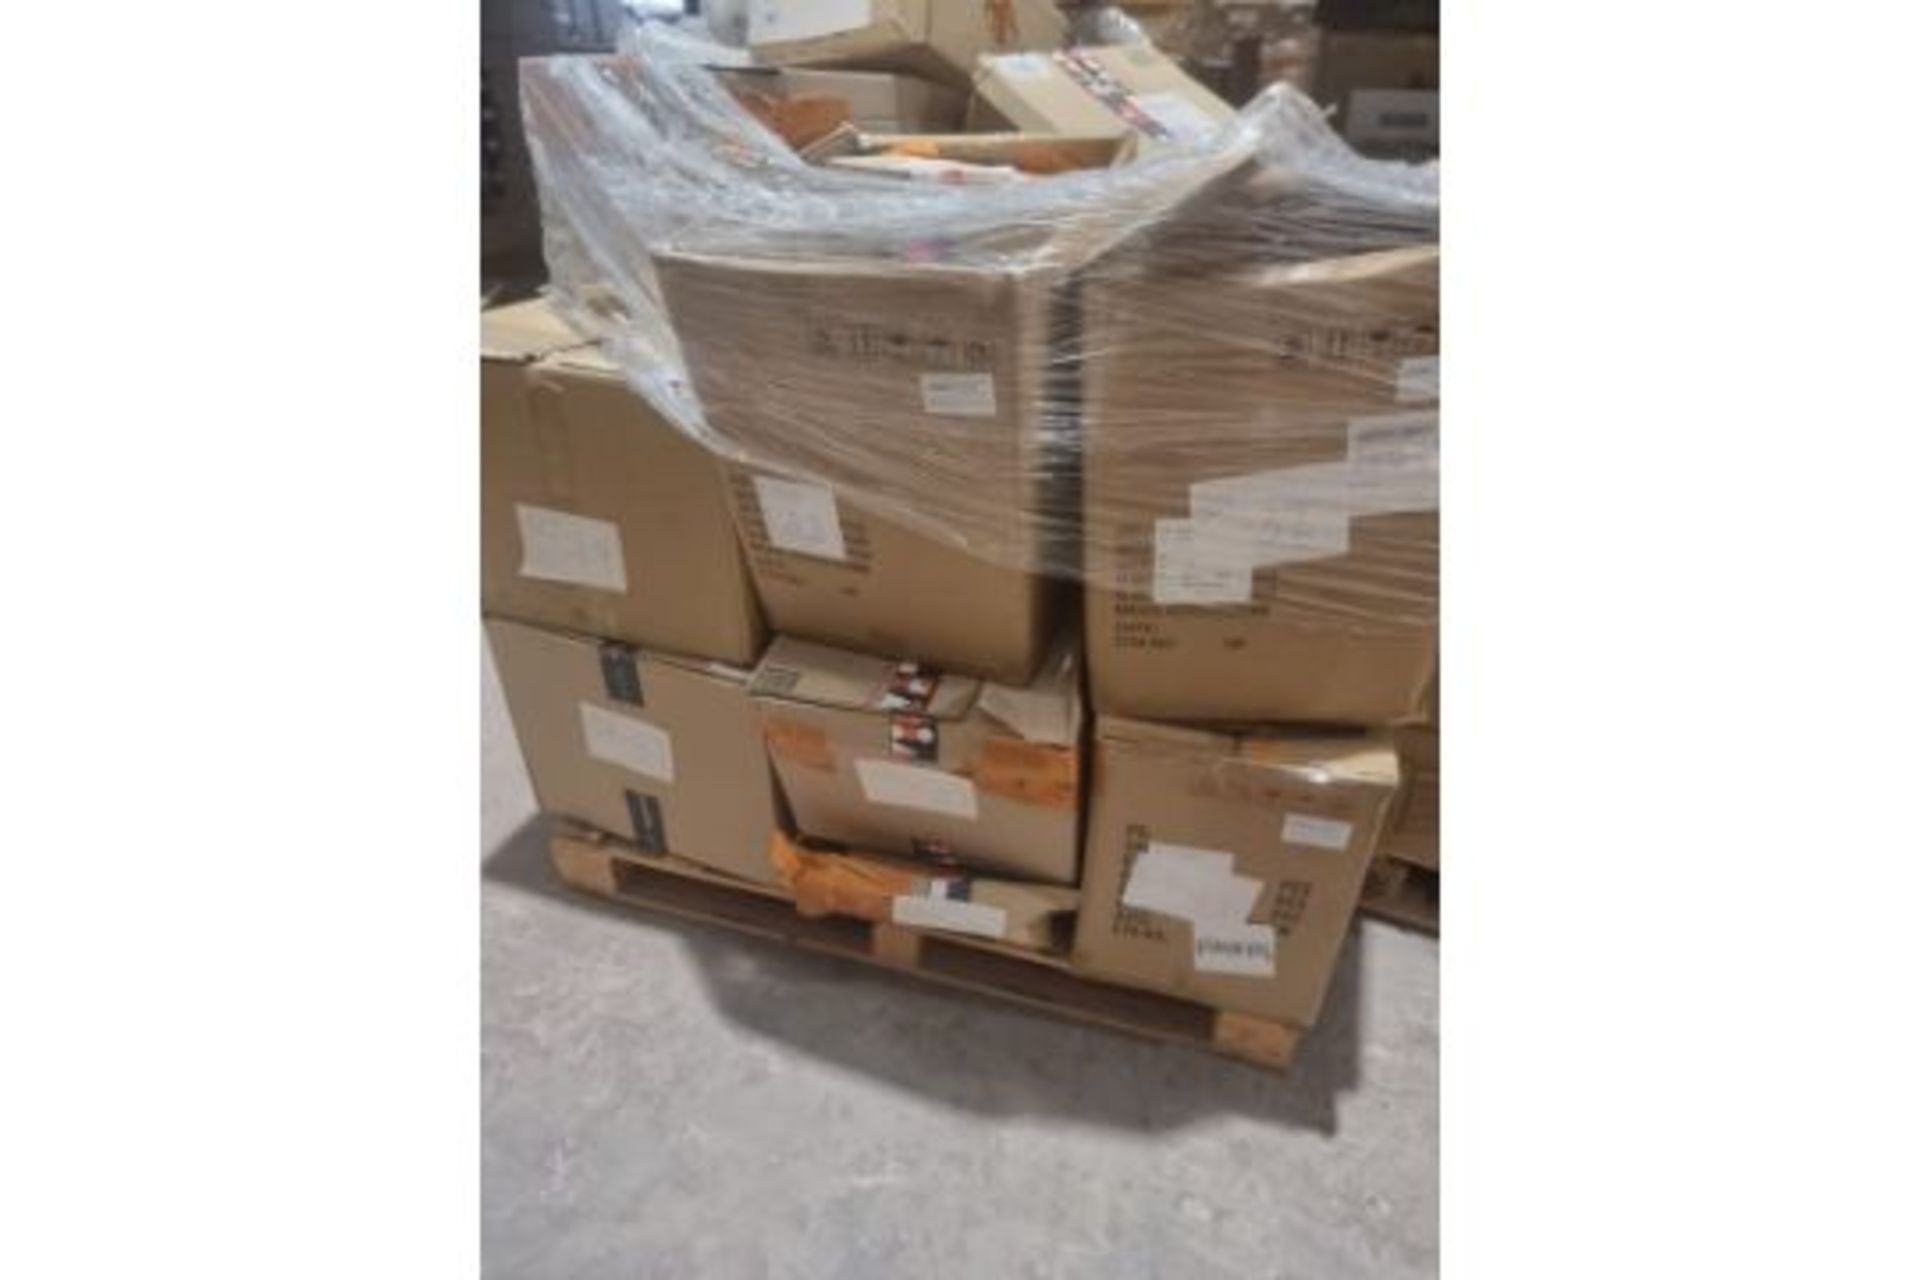 TRADE LOT TO CONTAIN 100 x MIXED BRAND NEW AMAZON OVERSTOCK ITEMS. ITEMS ARE PICKED RANDOMLY FROM - Image 20 of 29